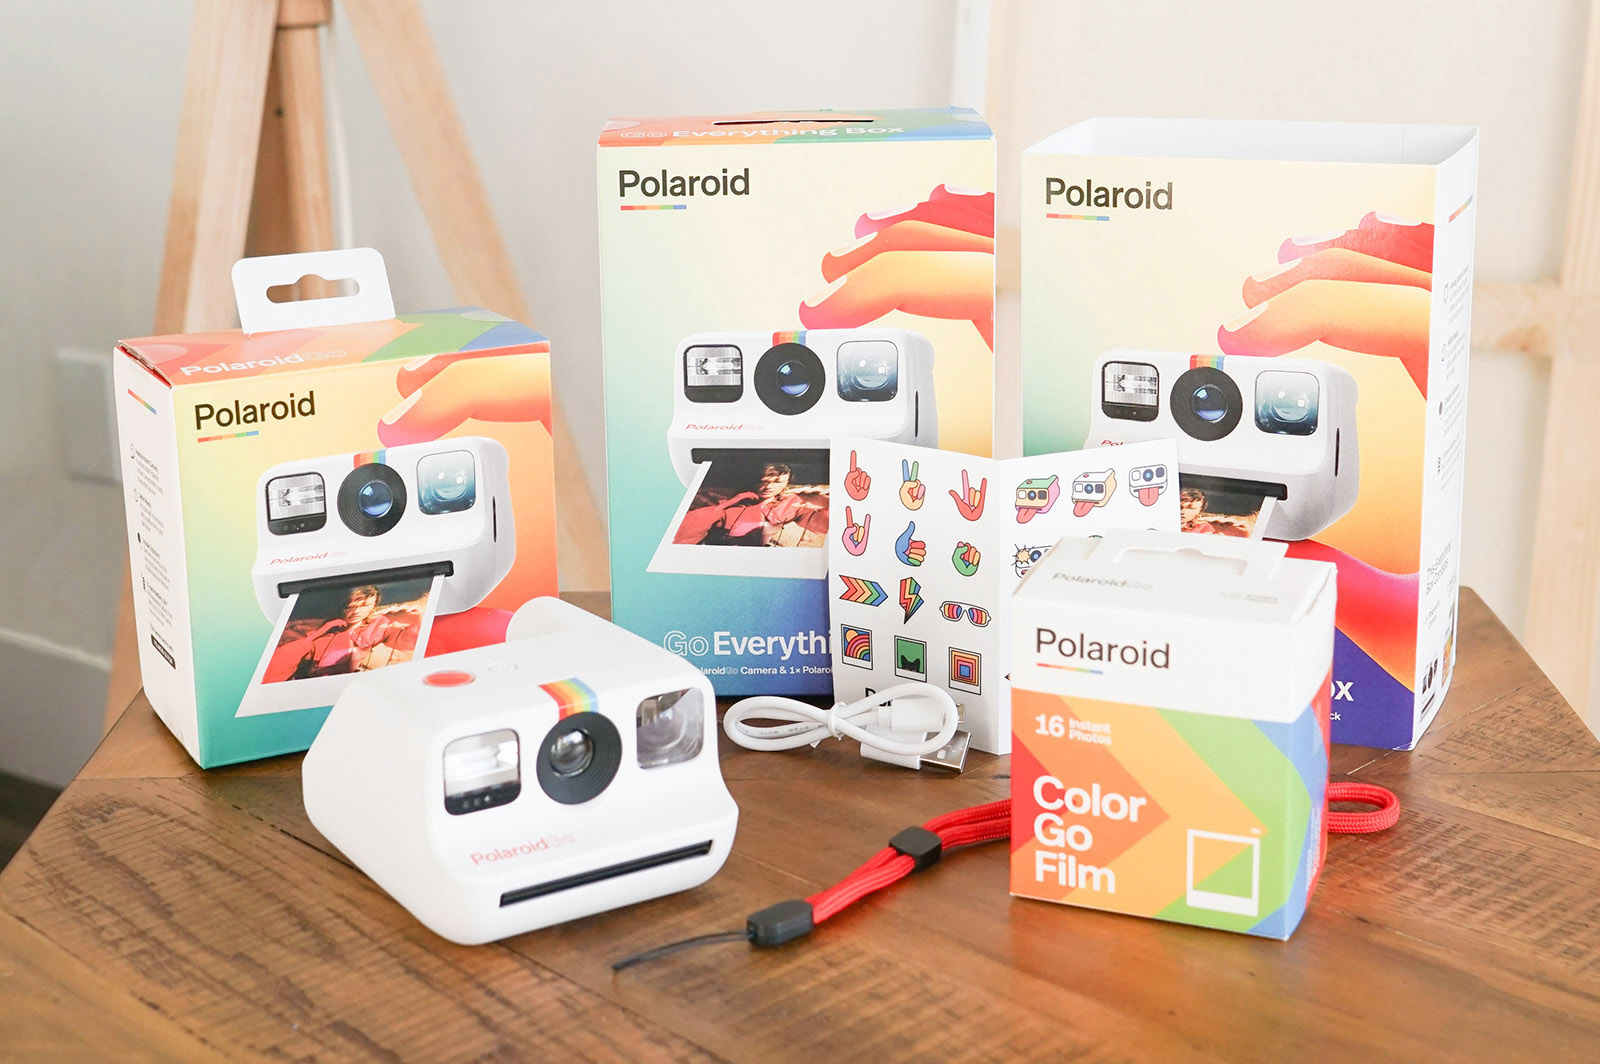 Polaroid Go review: travelers, that's the best instant camera for a journey